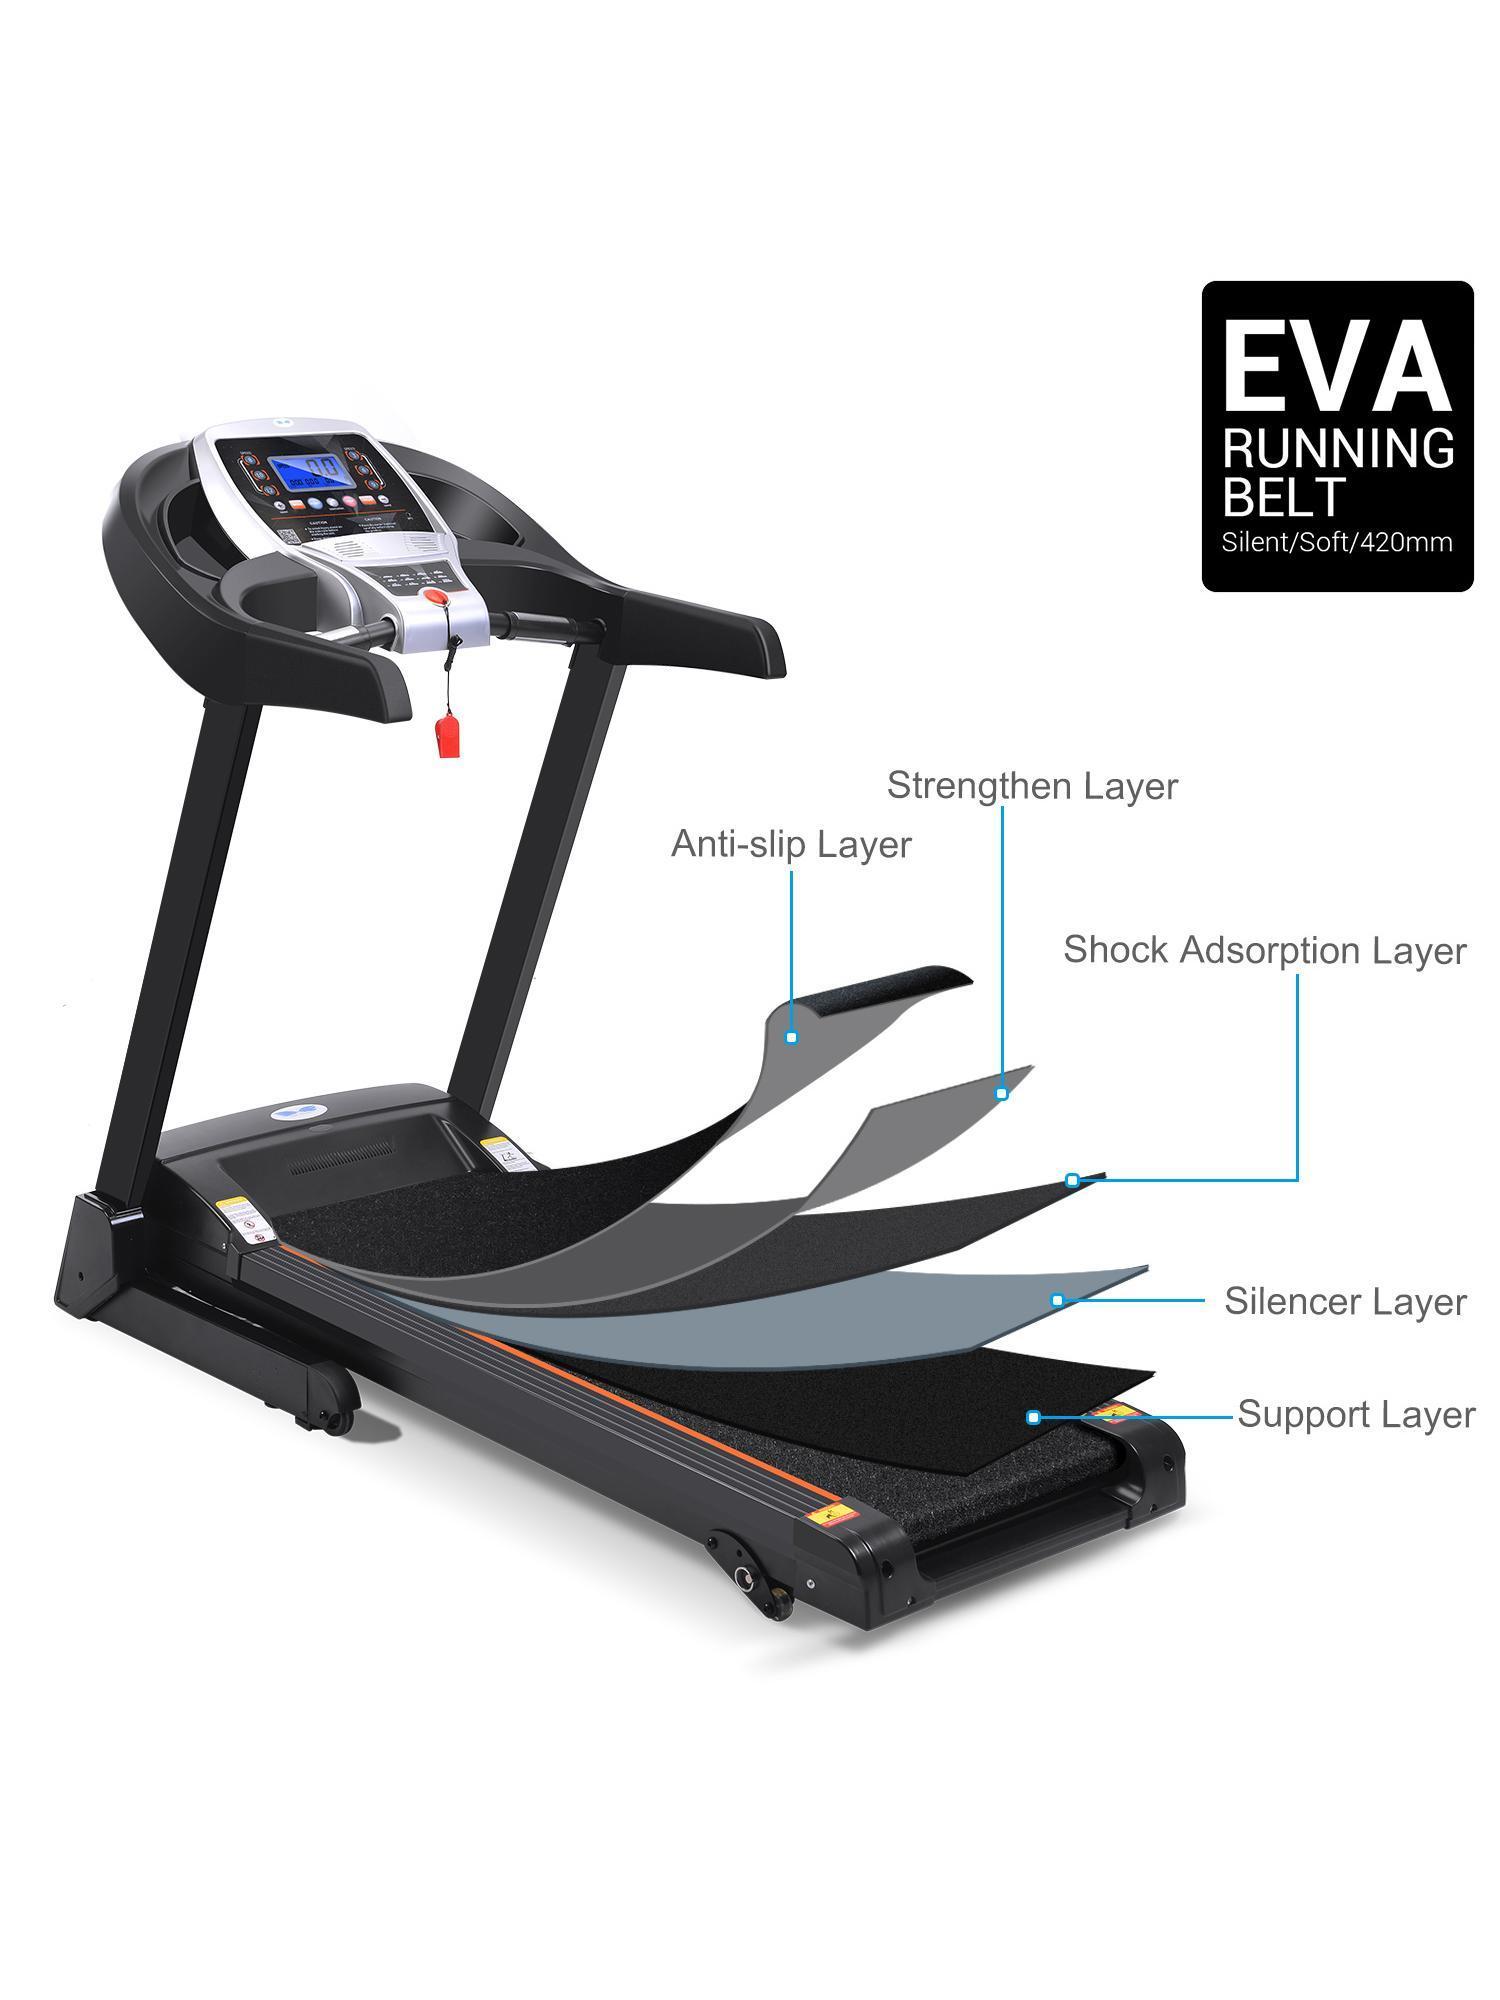 Ancheer 2.25HP Low Noise Bluetooth +12 Running Programs 230LB Electric Folding Treadmill With Incline 3%/5% App Control,Shock Reduction System - image 4 of 10